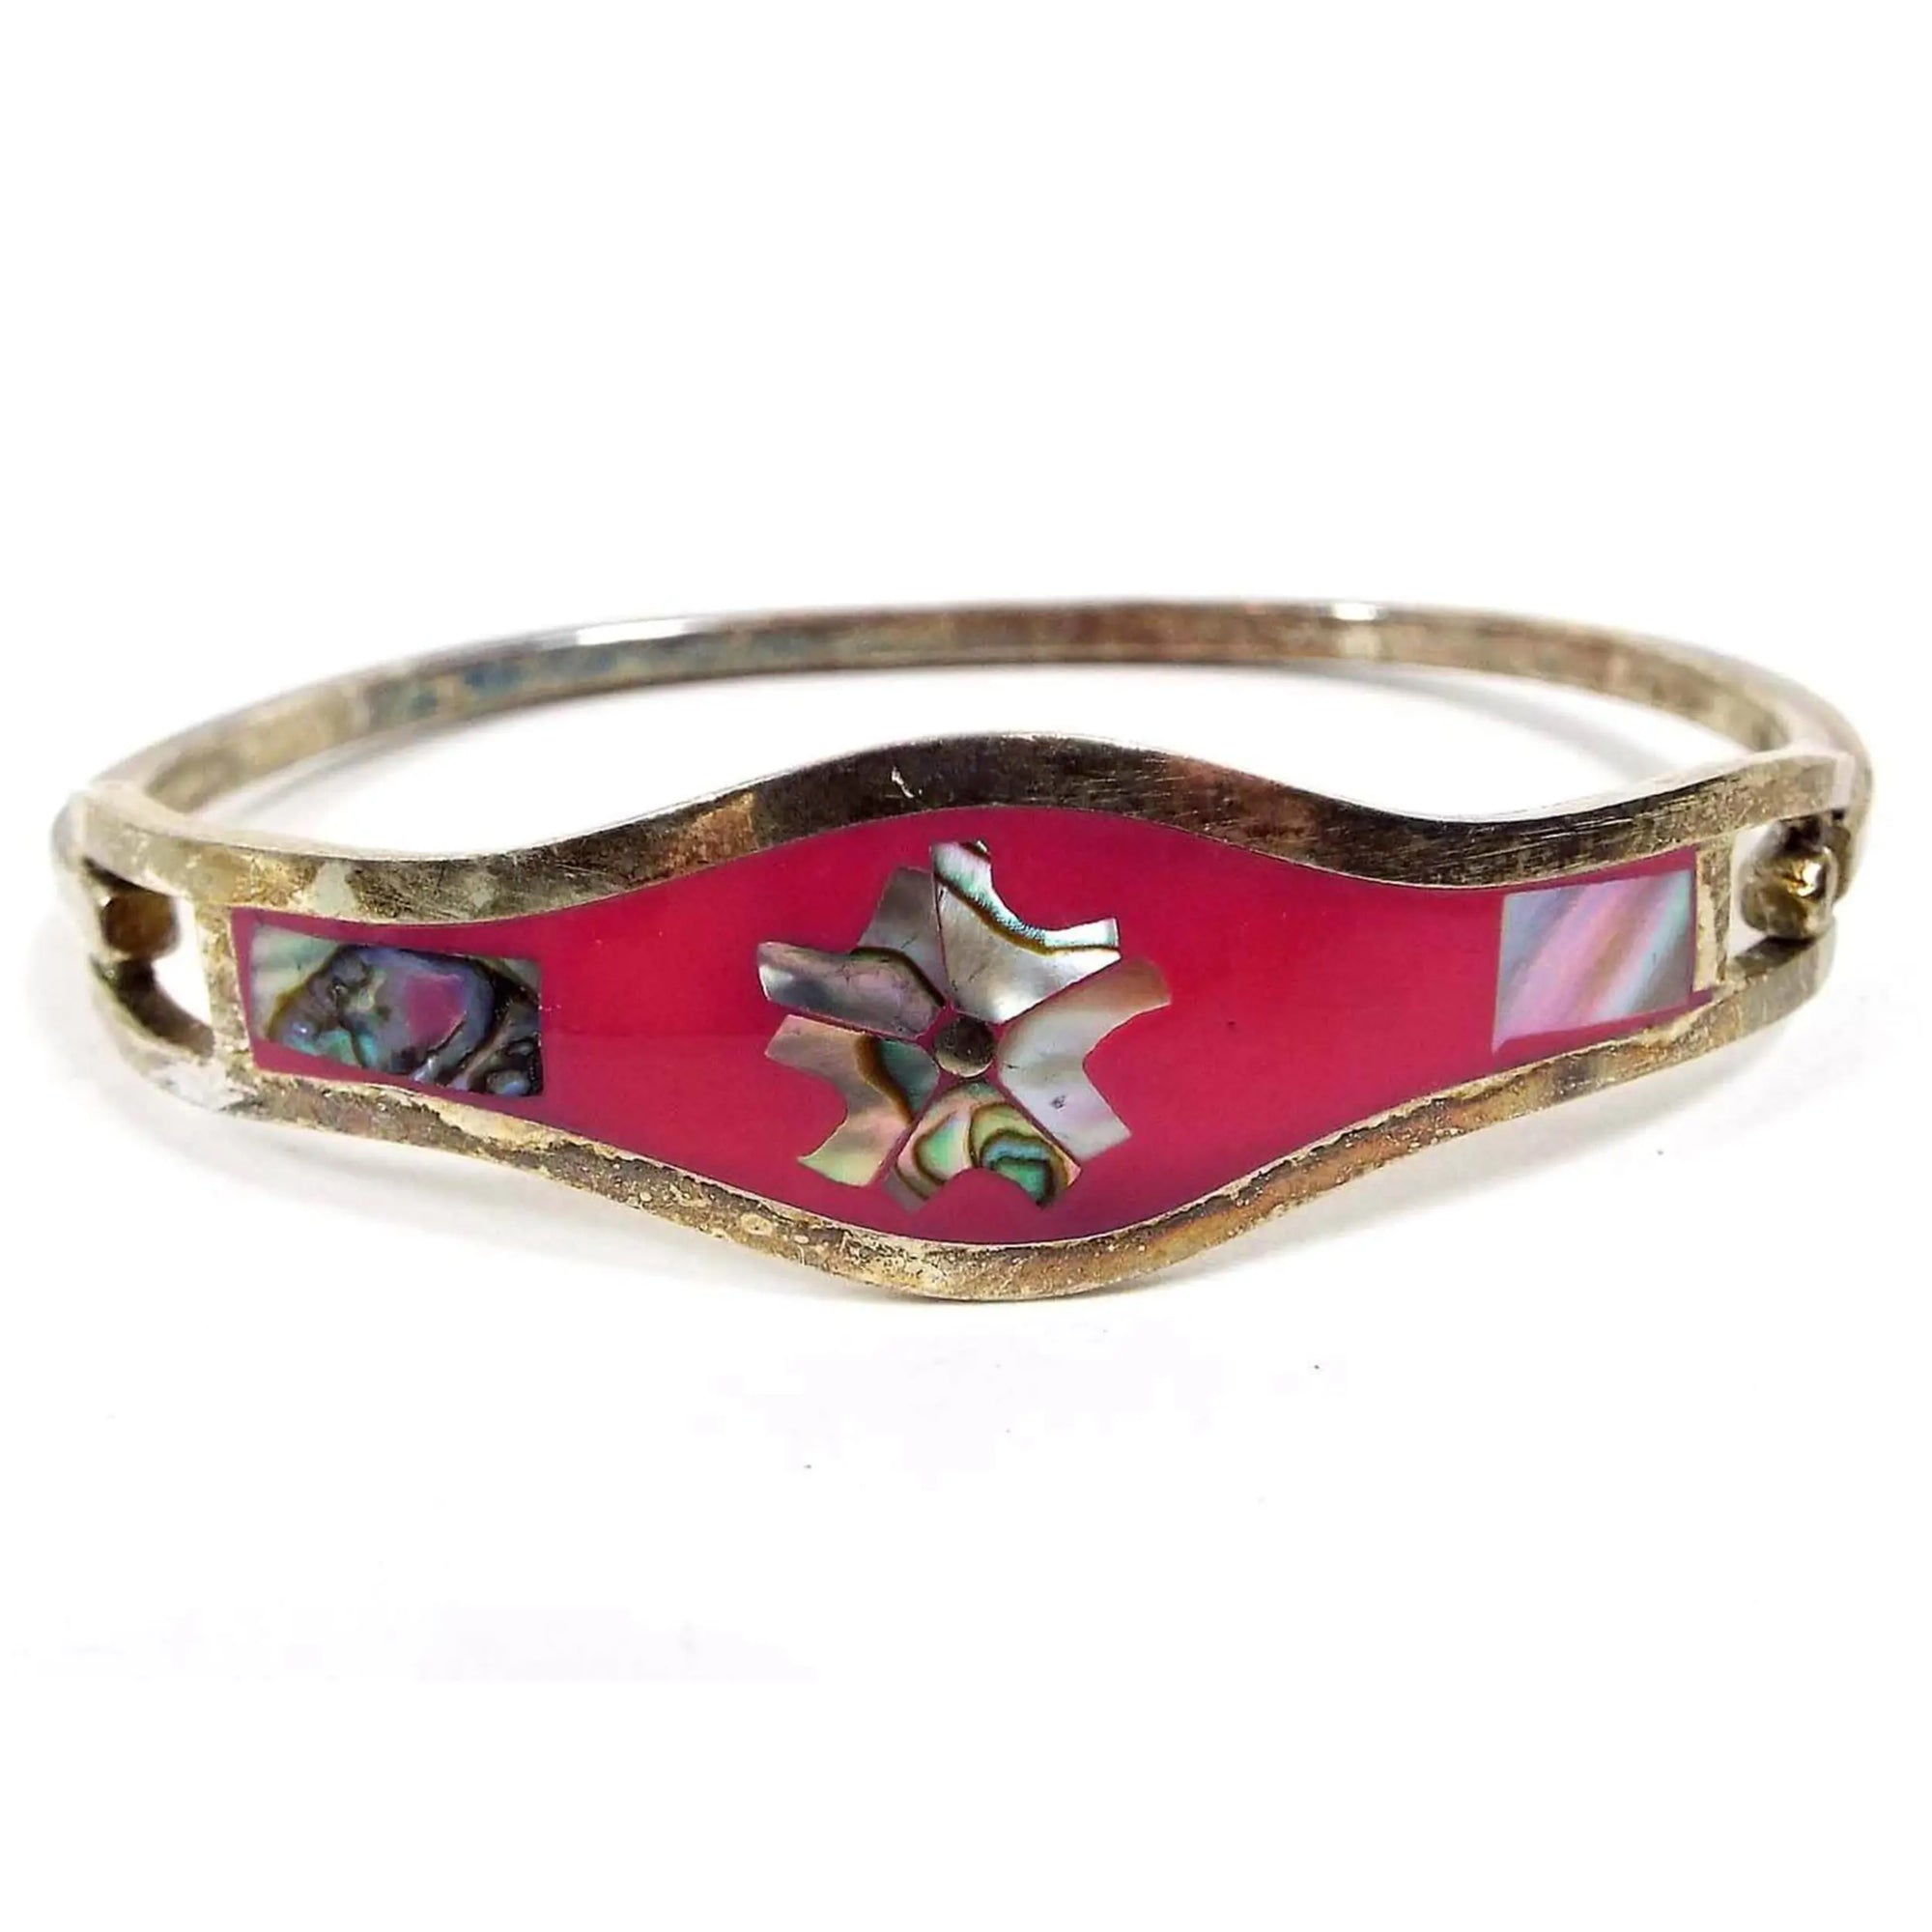 Front view of the retro vintage abalone floral hinged bangle bracelet. The front has a rounded middle area with bright pink enamel and inlaid abalone shell in a flower shape. There is a rectangle piece of abalone at each side as well. The metal is darkened silver tone color from age.